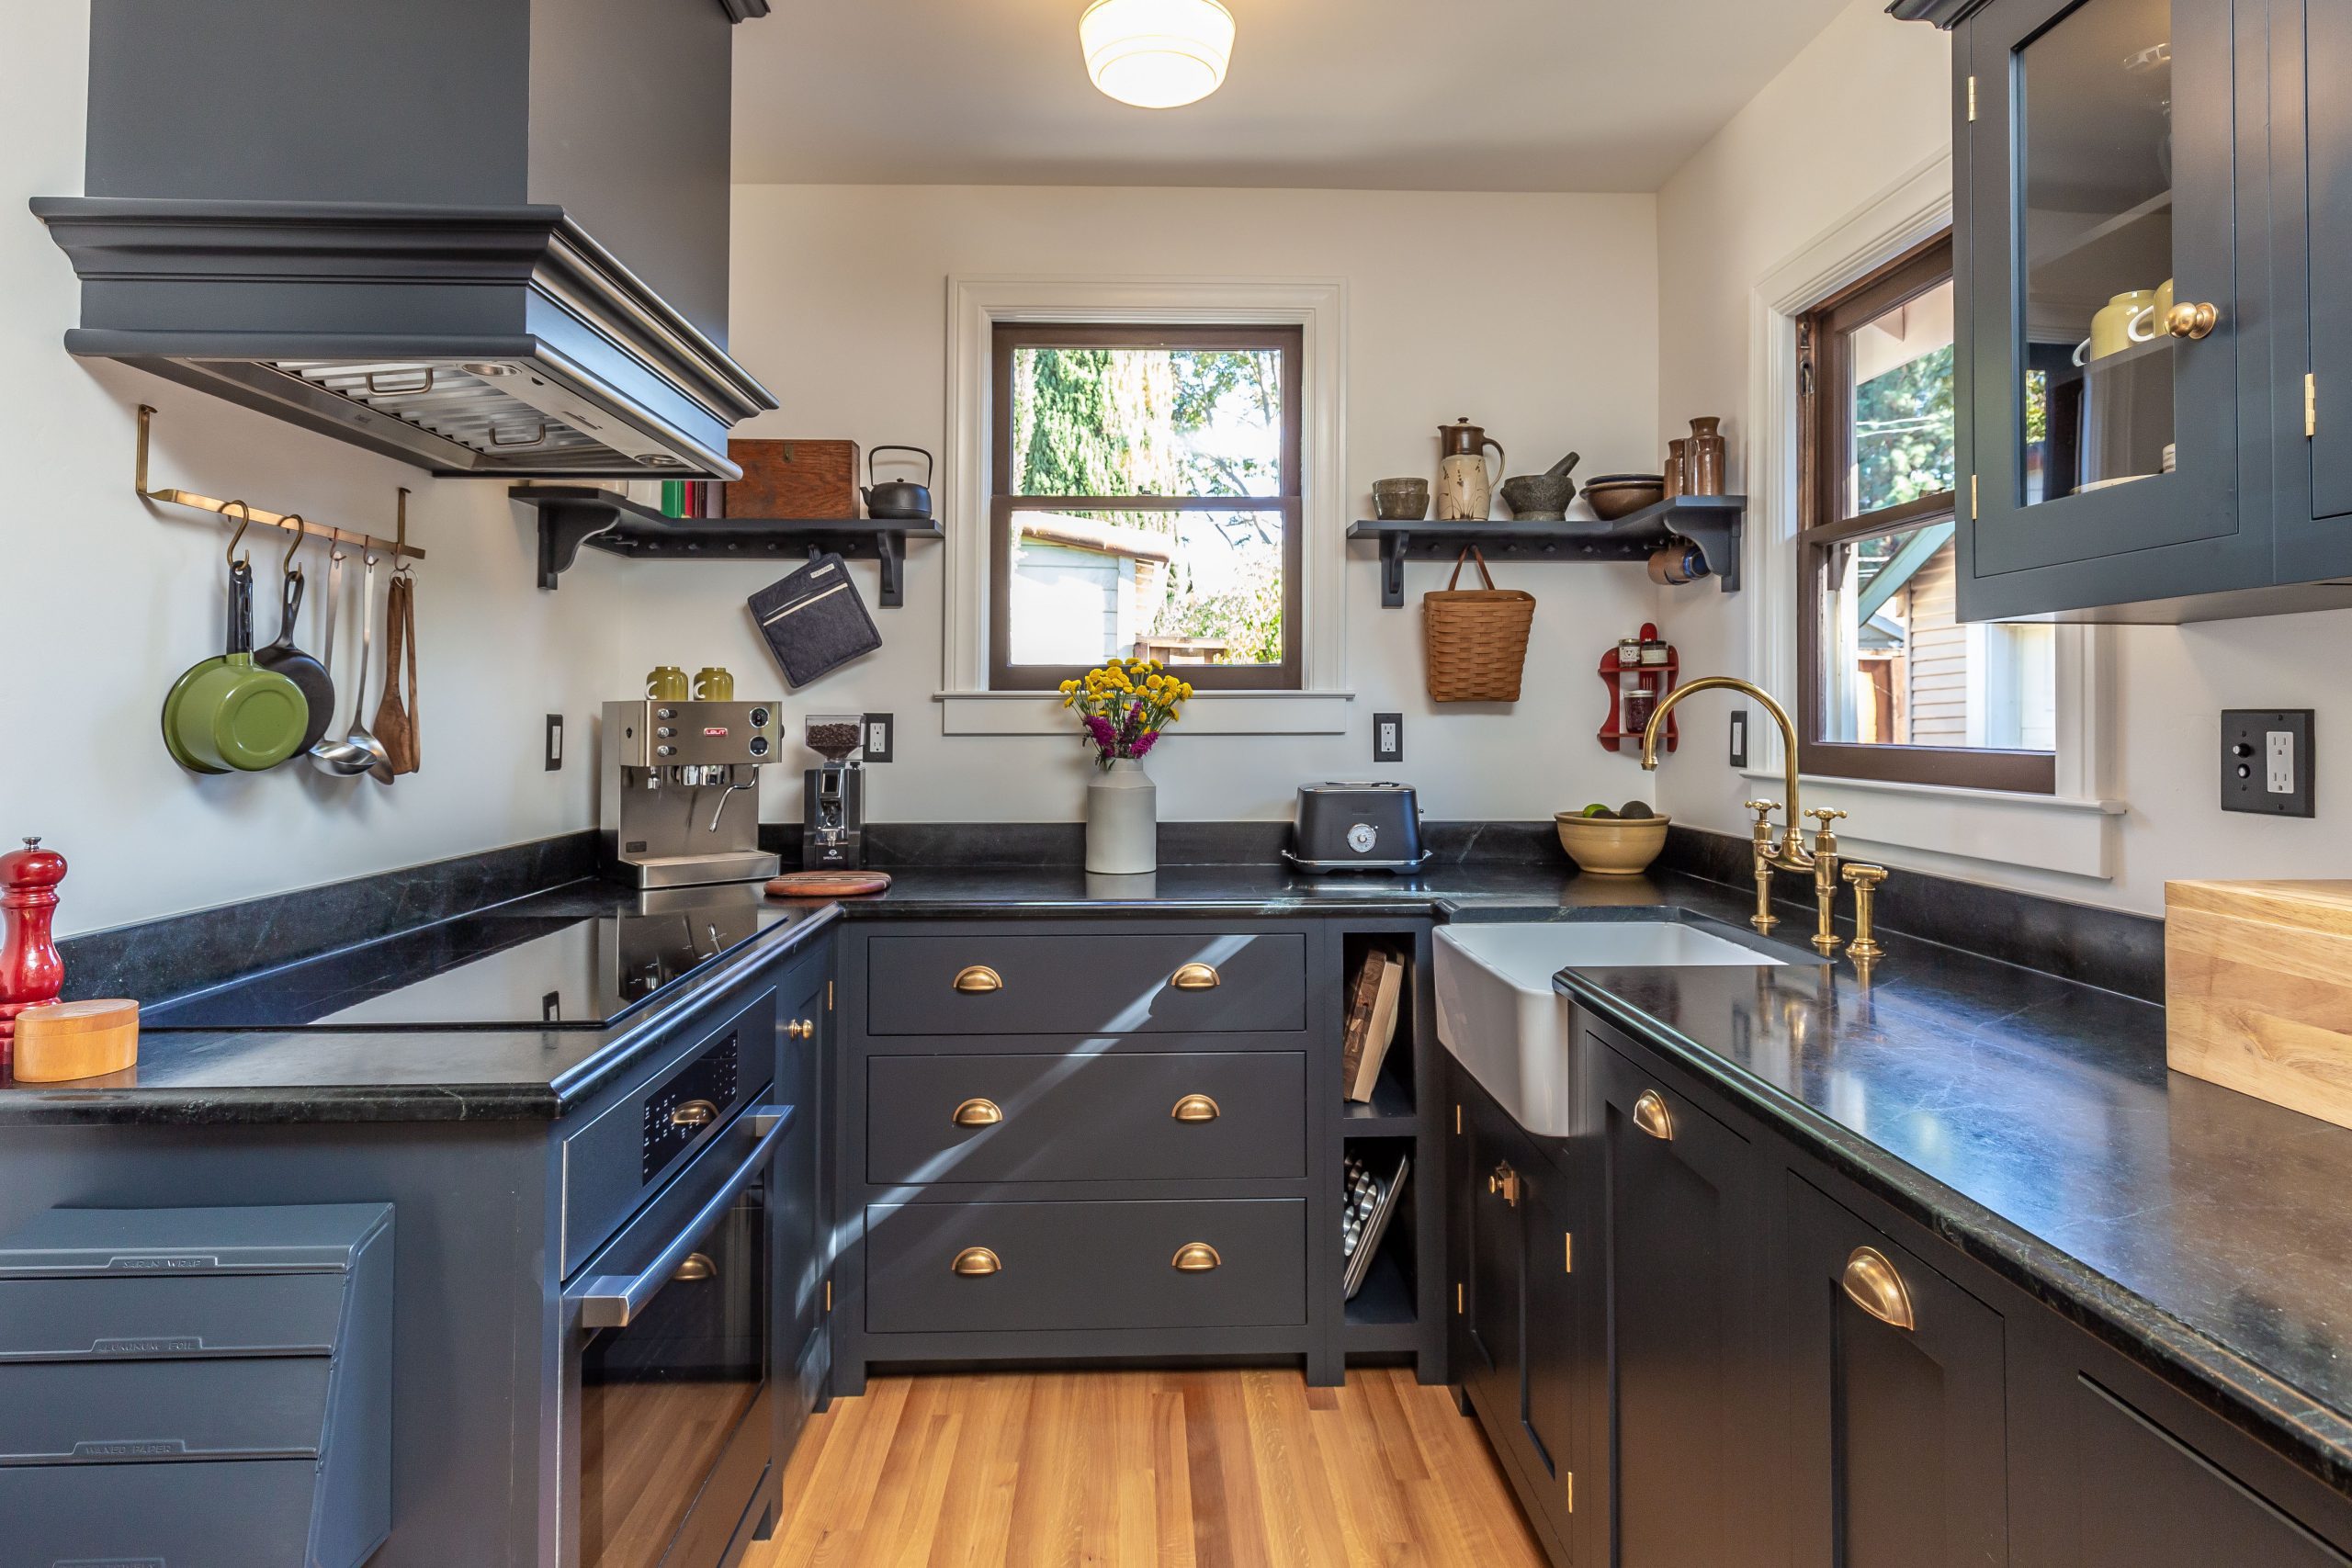 A-kitchen-remodel-mistake-to-avoid-is-inadequate-ventilation-of-the-space